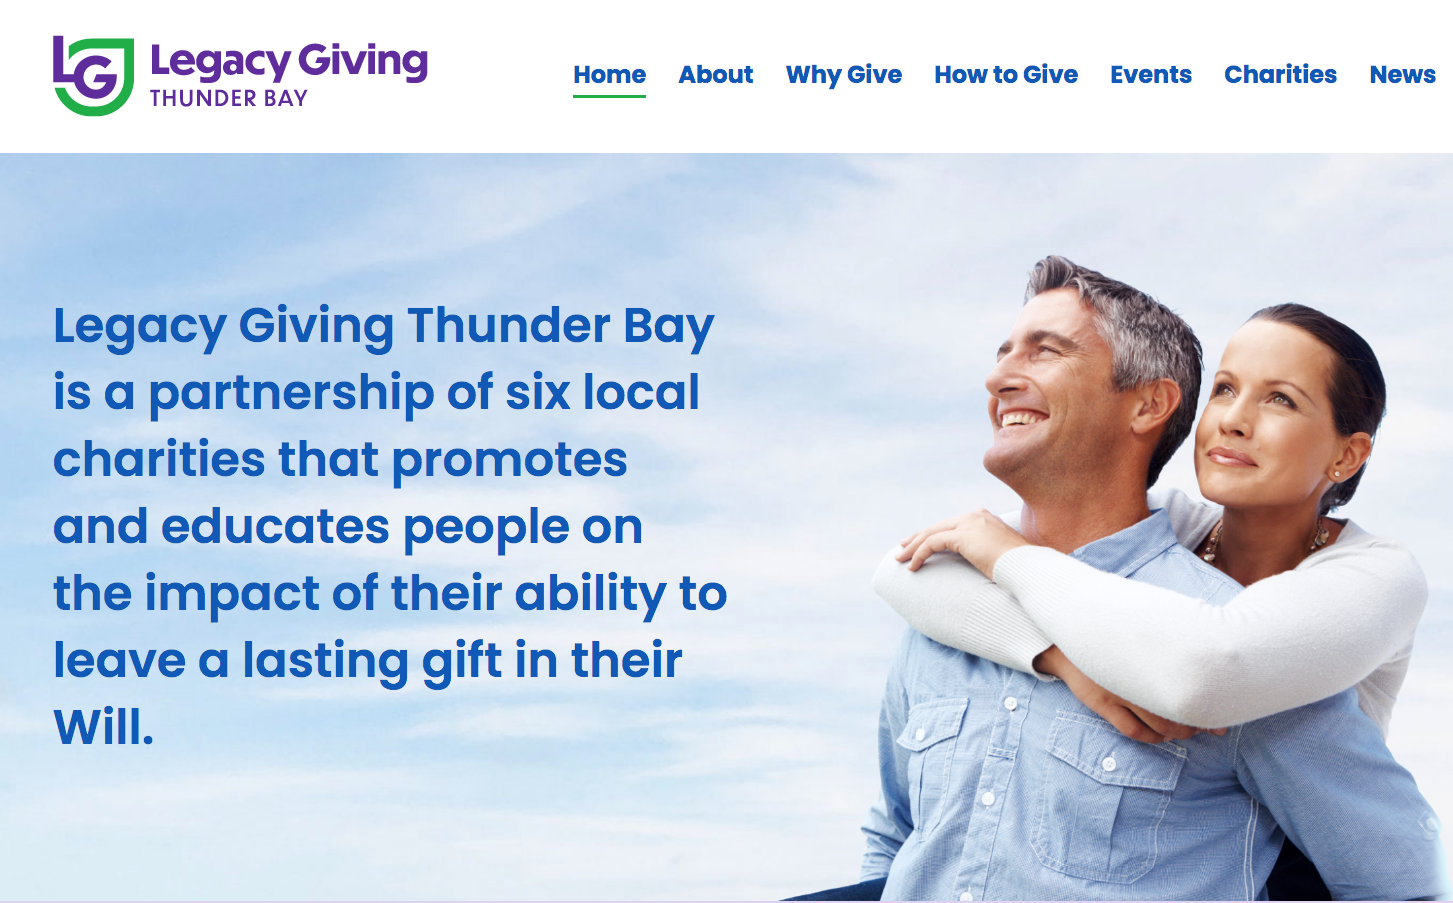 New Website Helps Answer Your Questions about Legacy Giving